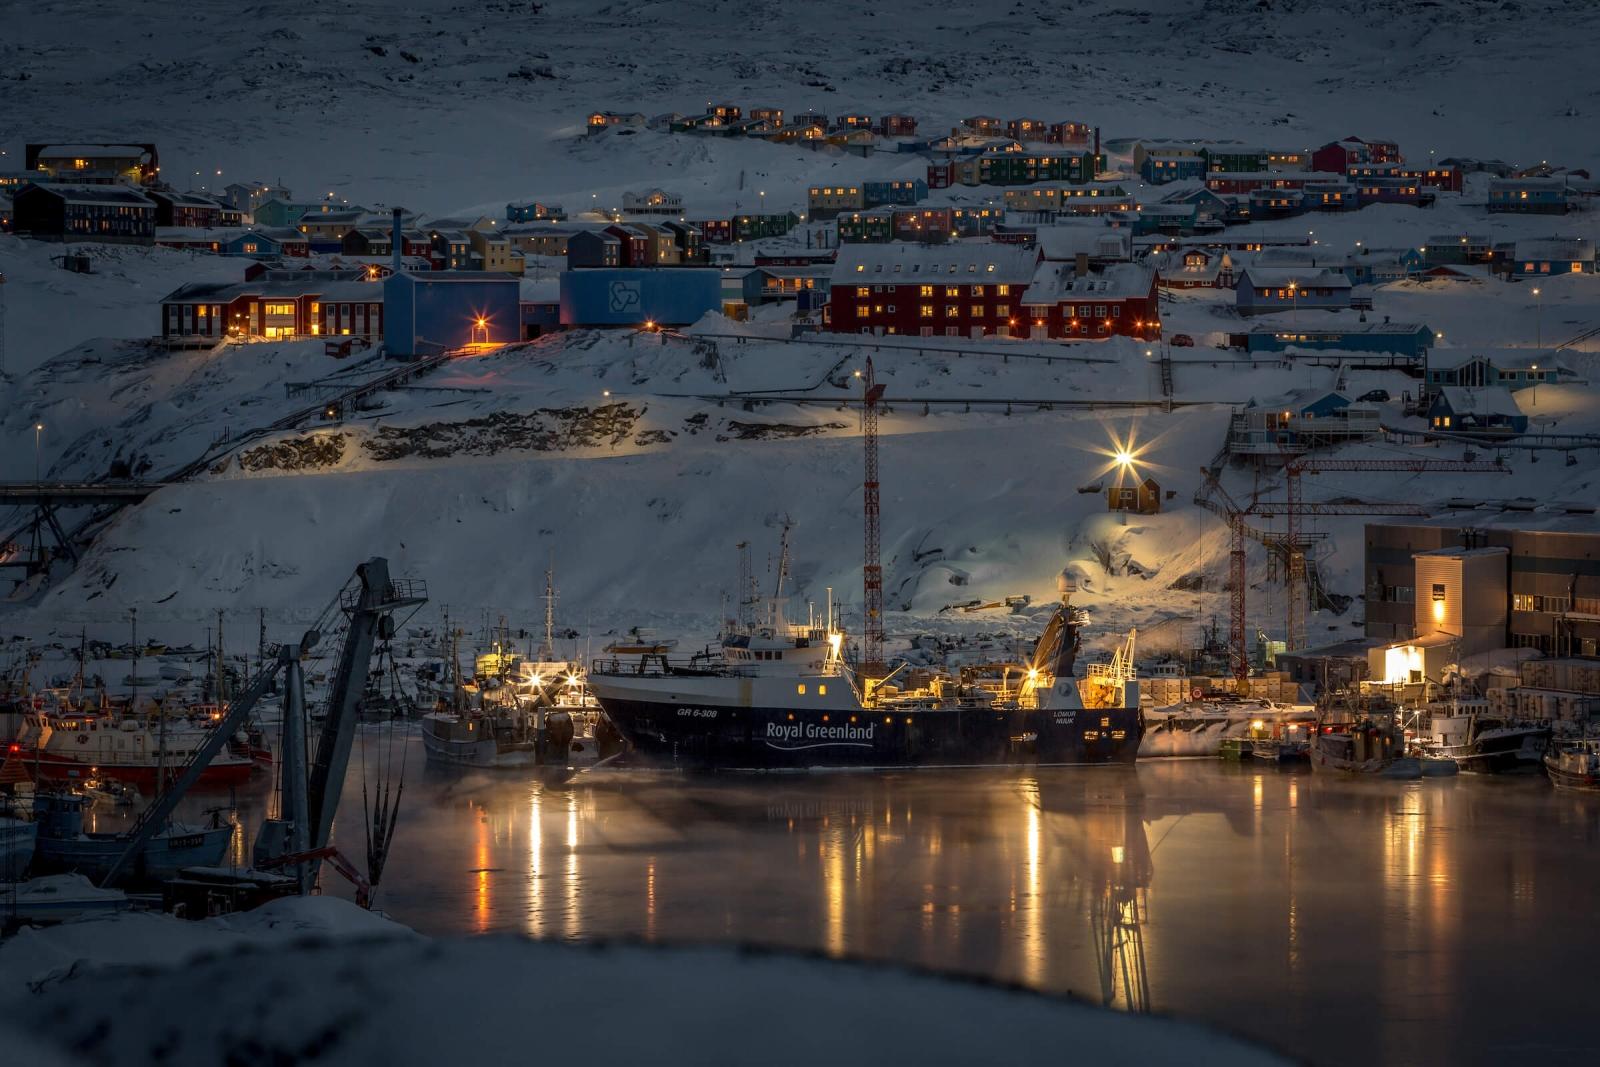 Ilulissat in Greenland at night. Photo by Mads Pihl